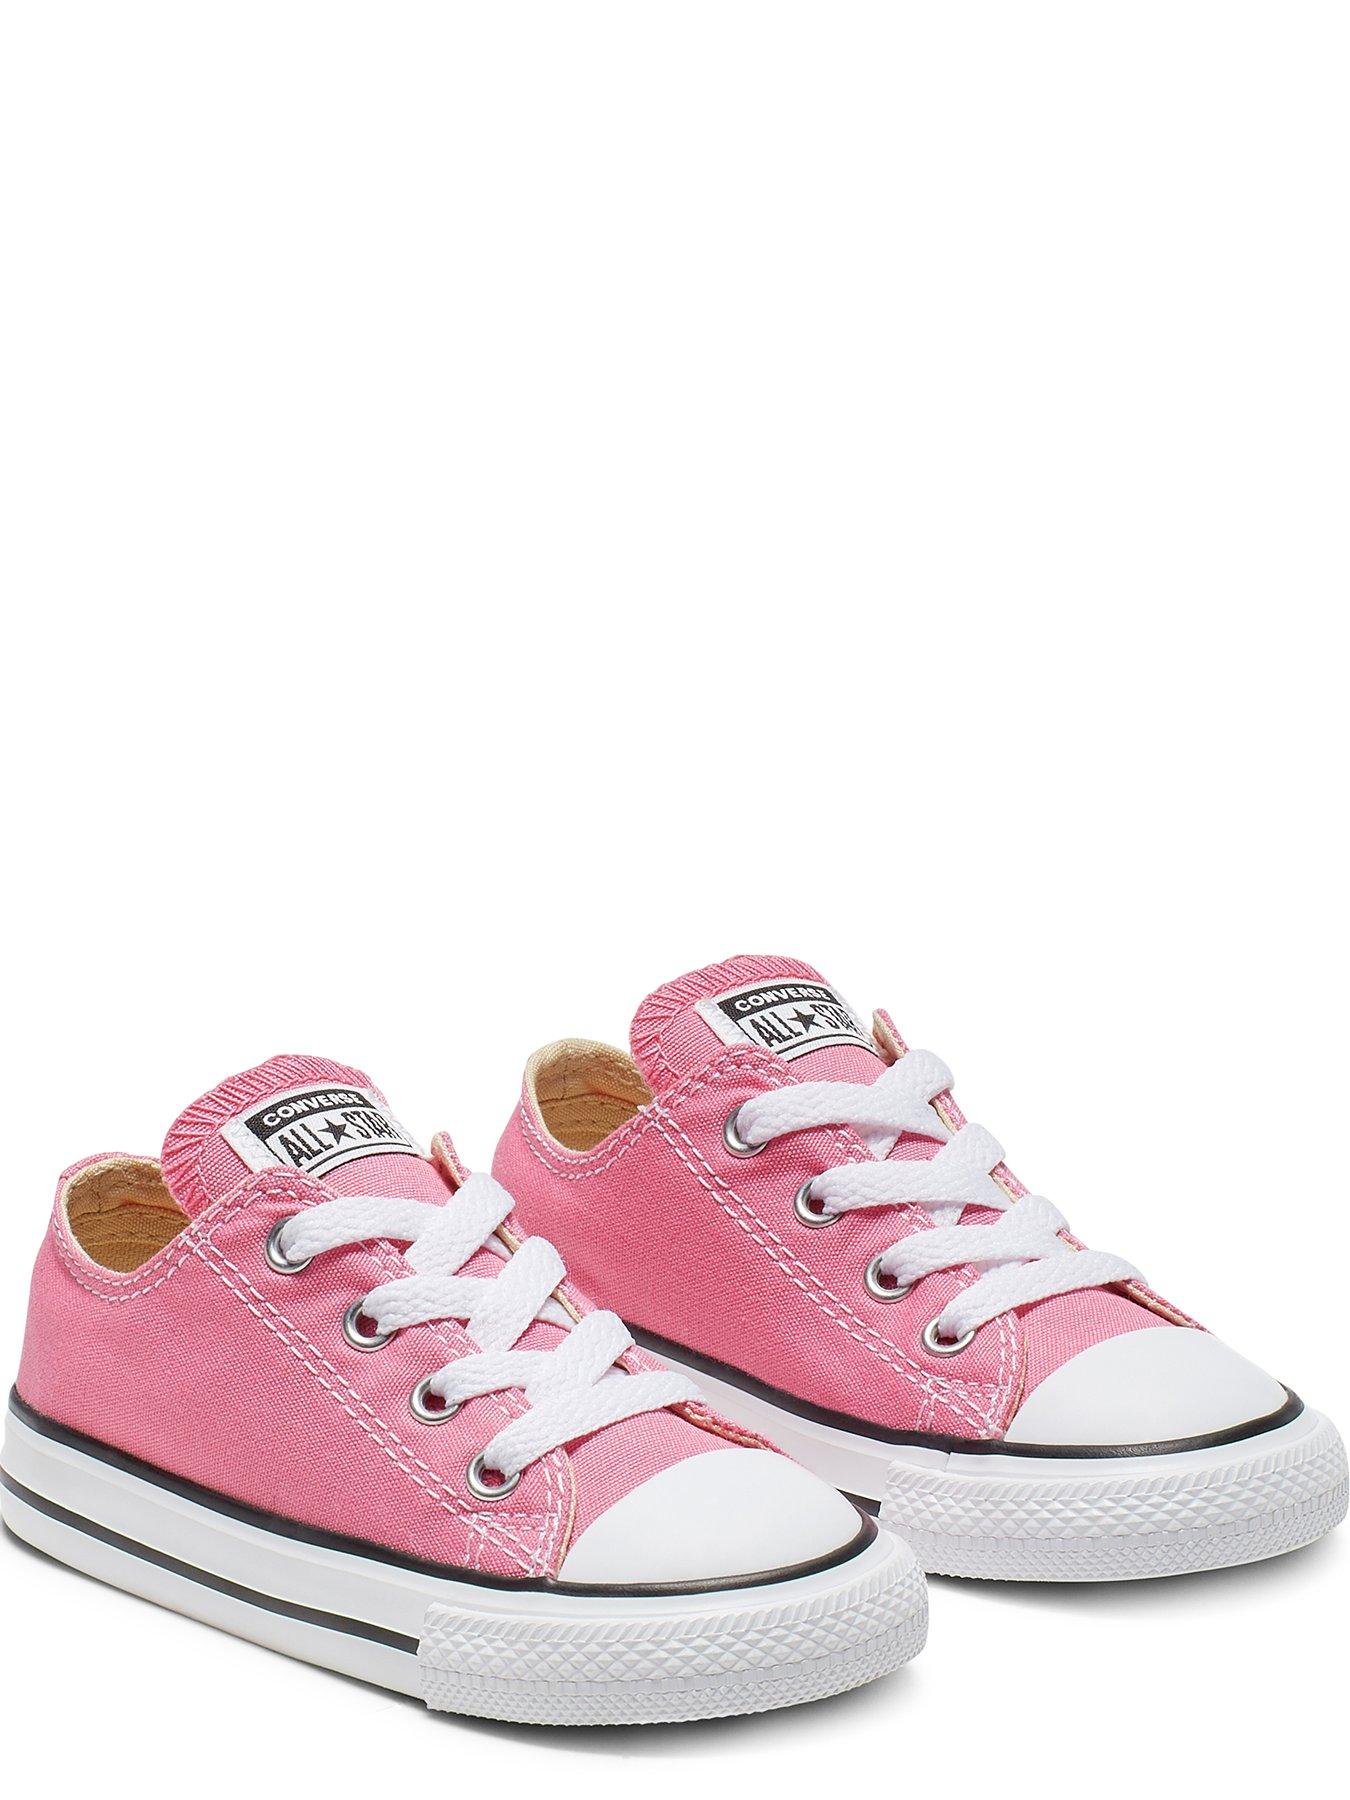 Chuck All Star Ox Infant Girls Trainers -Pink Very Ireland